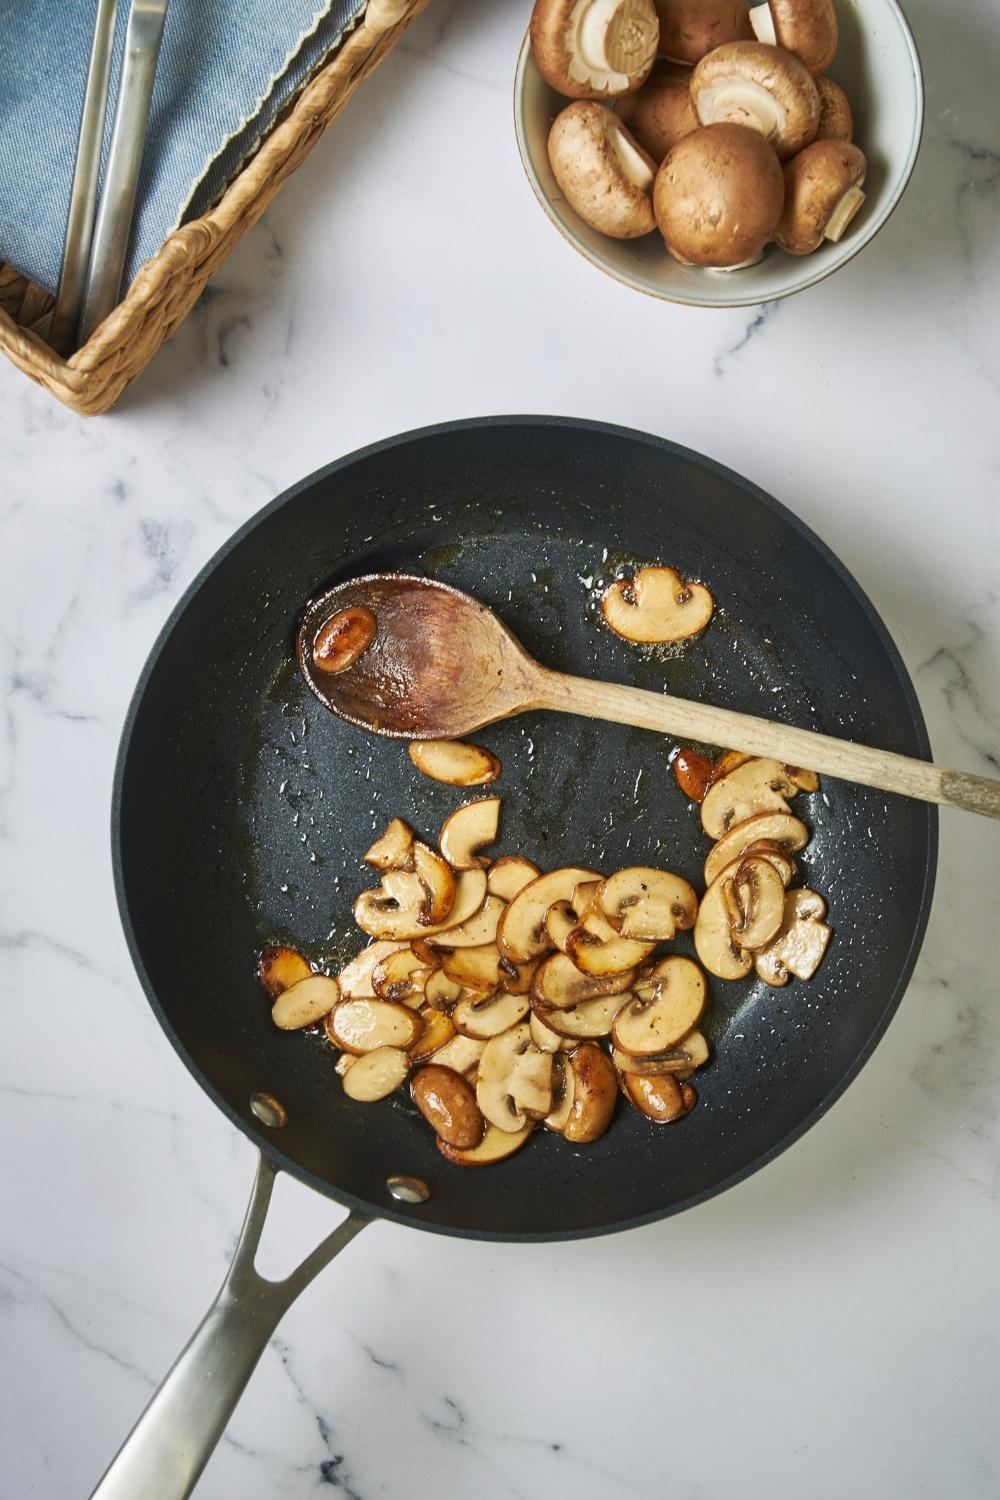 Skillet with sauteed mushrooms, a wooden spoon, and a bowl of raw mushrooms next to the skillet.